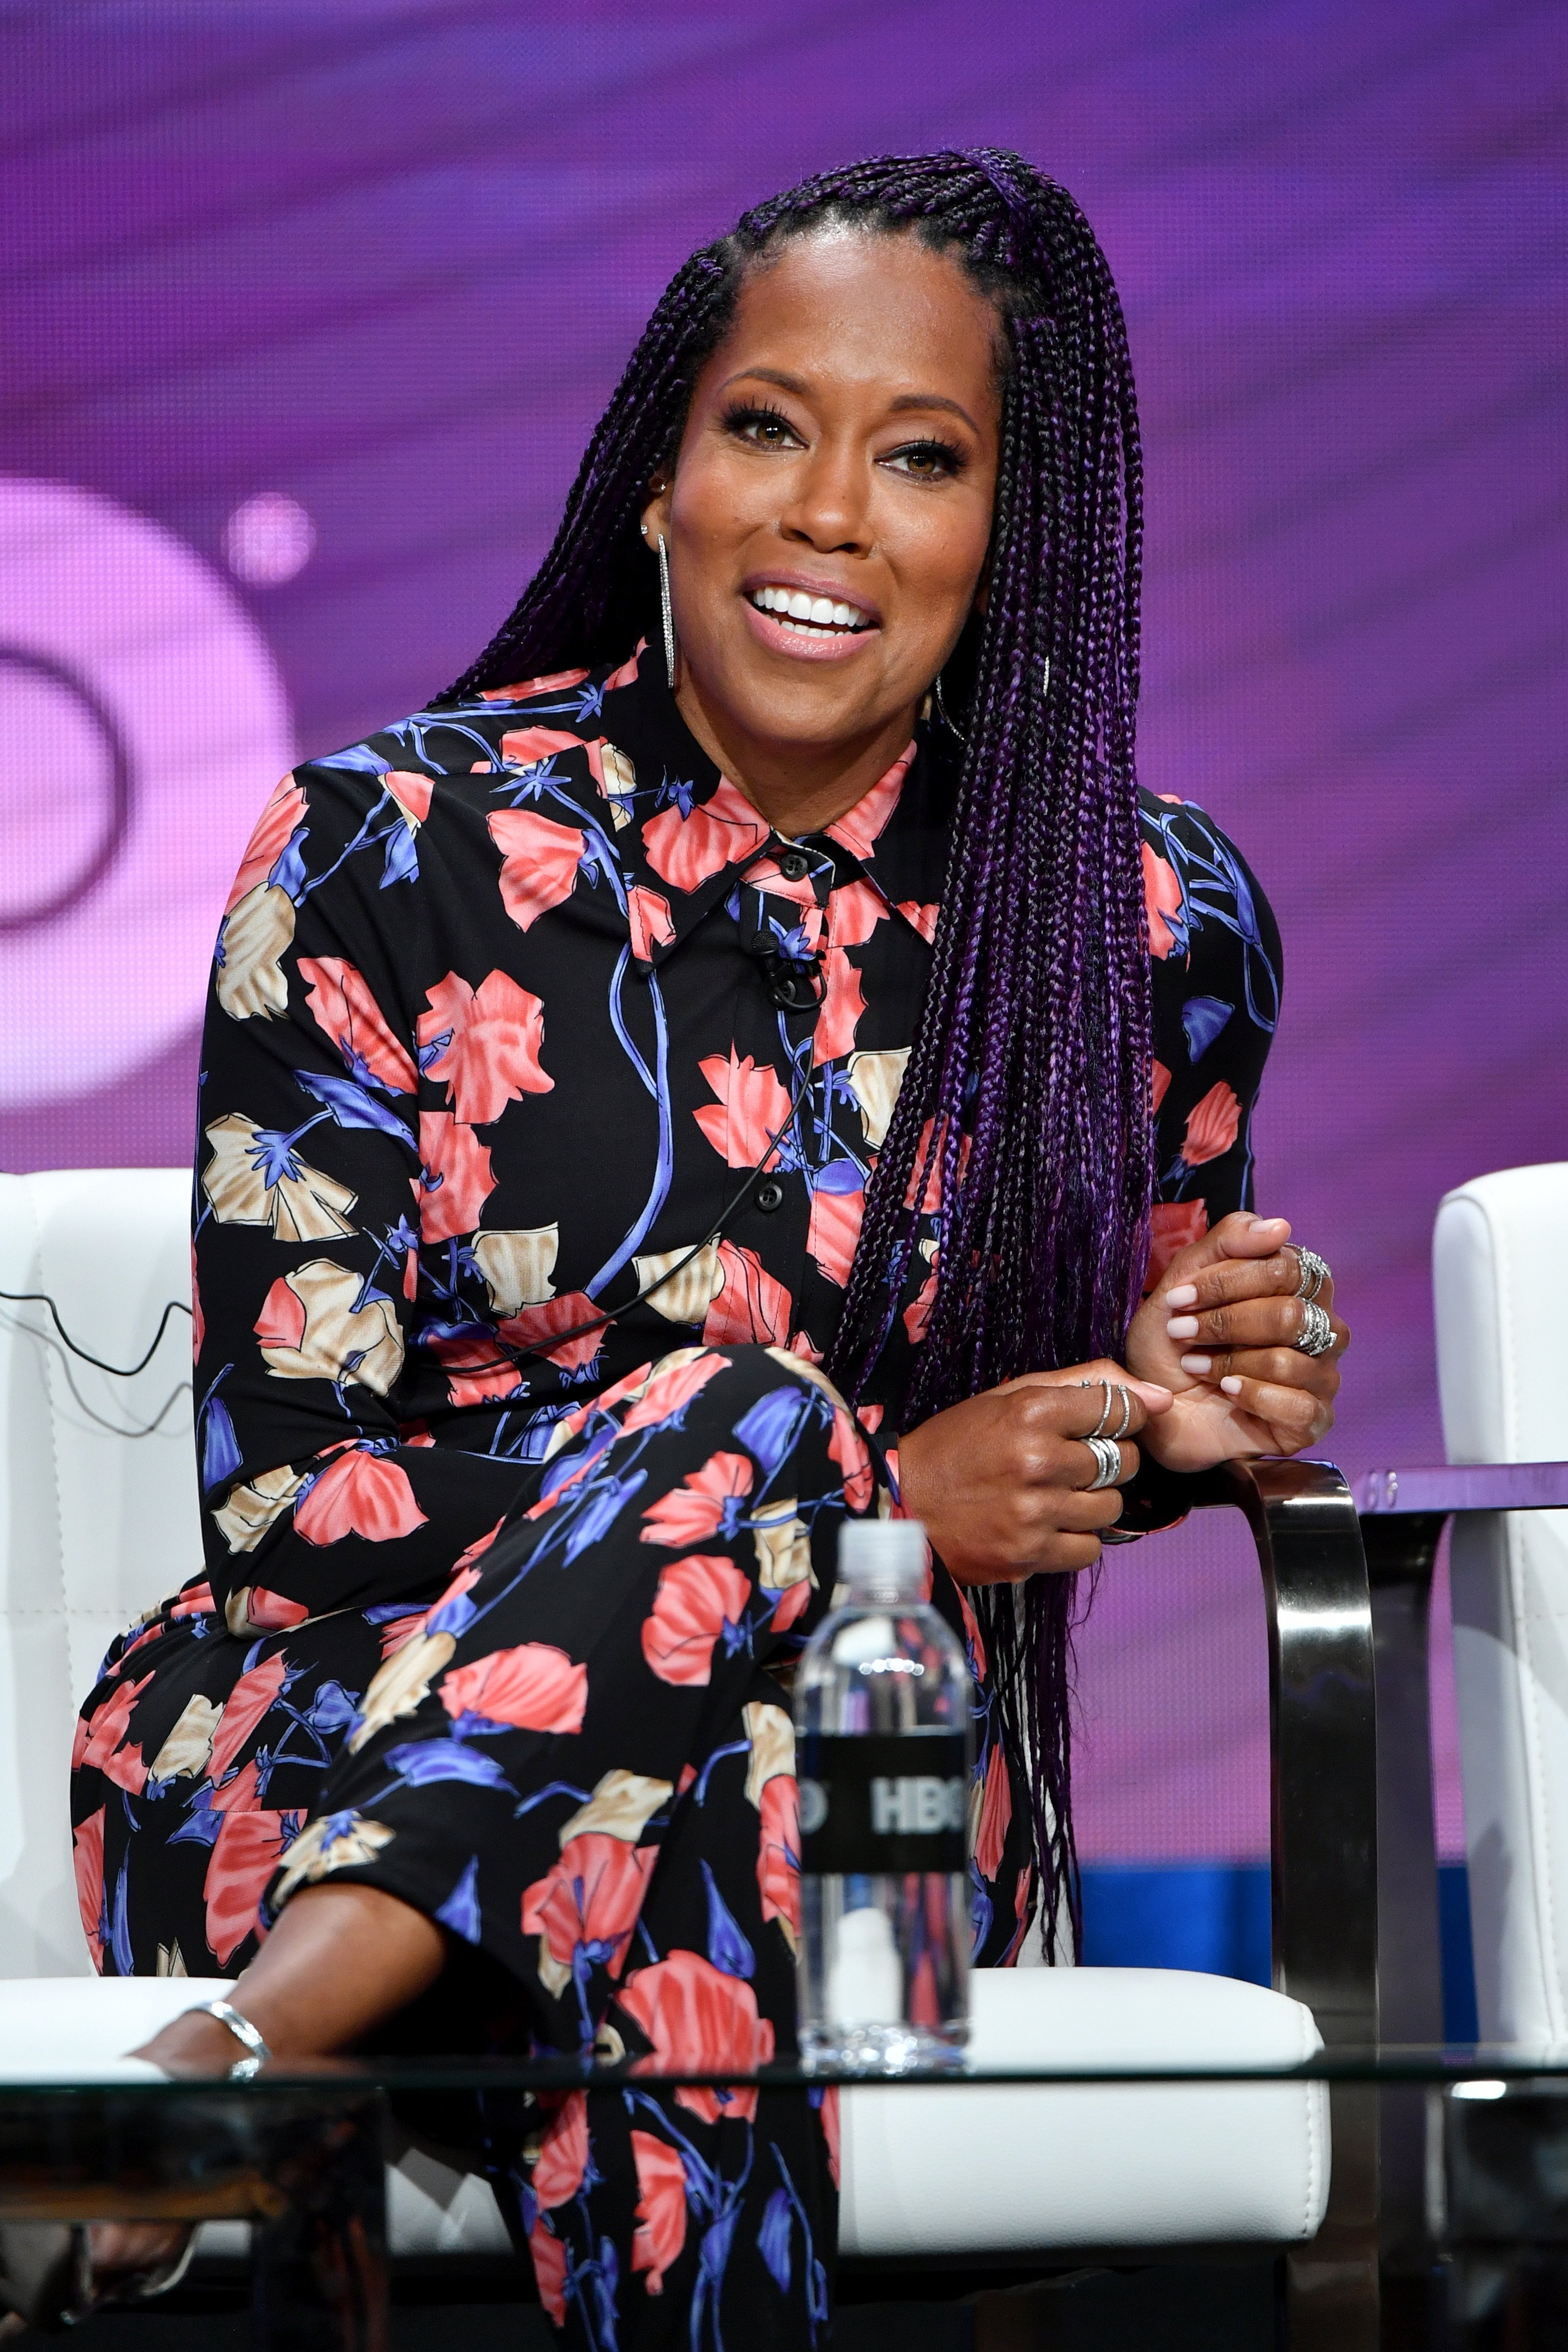 Regina King of 'Watchmen' speaks during the HBO segment of the Summer 2019 Television Critics Association on July 24, 2019. | Photo: GettyImages